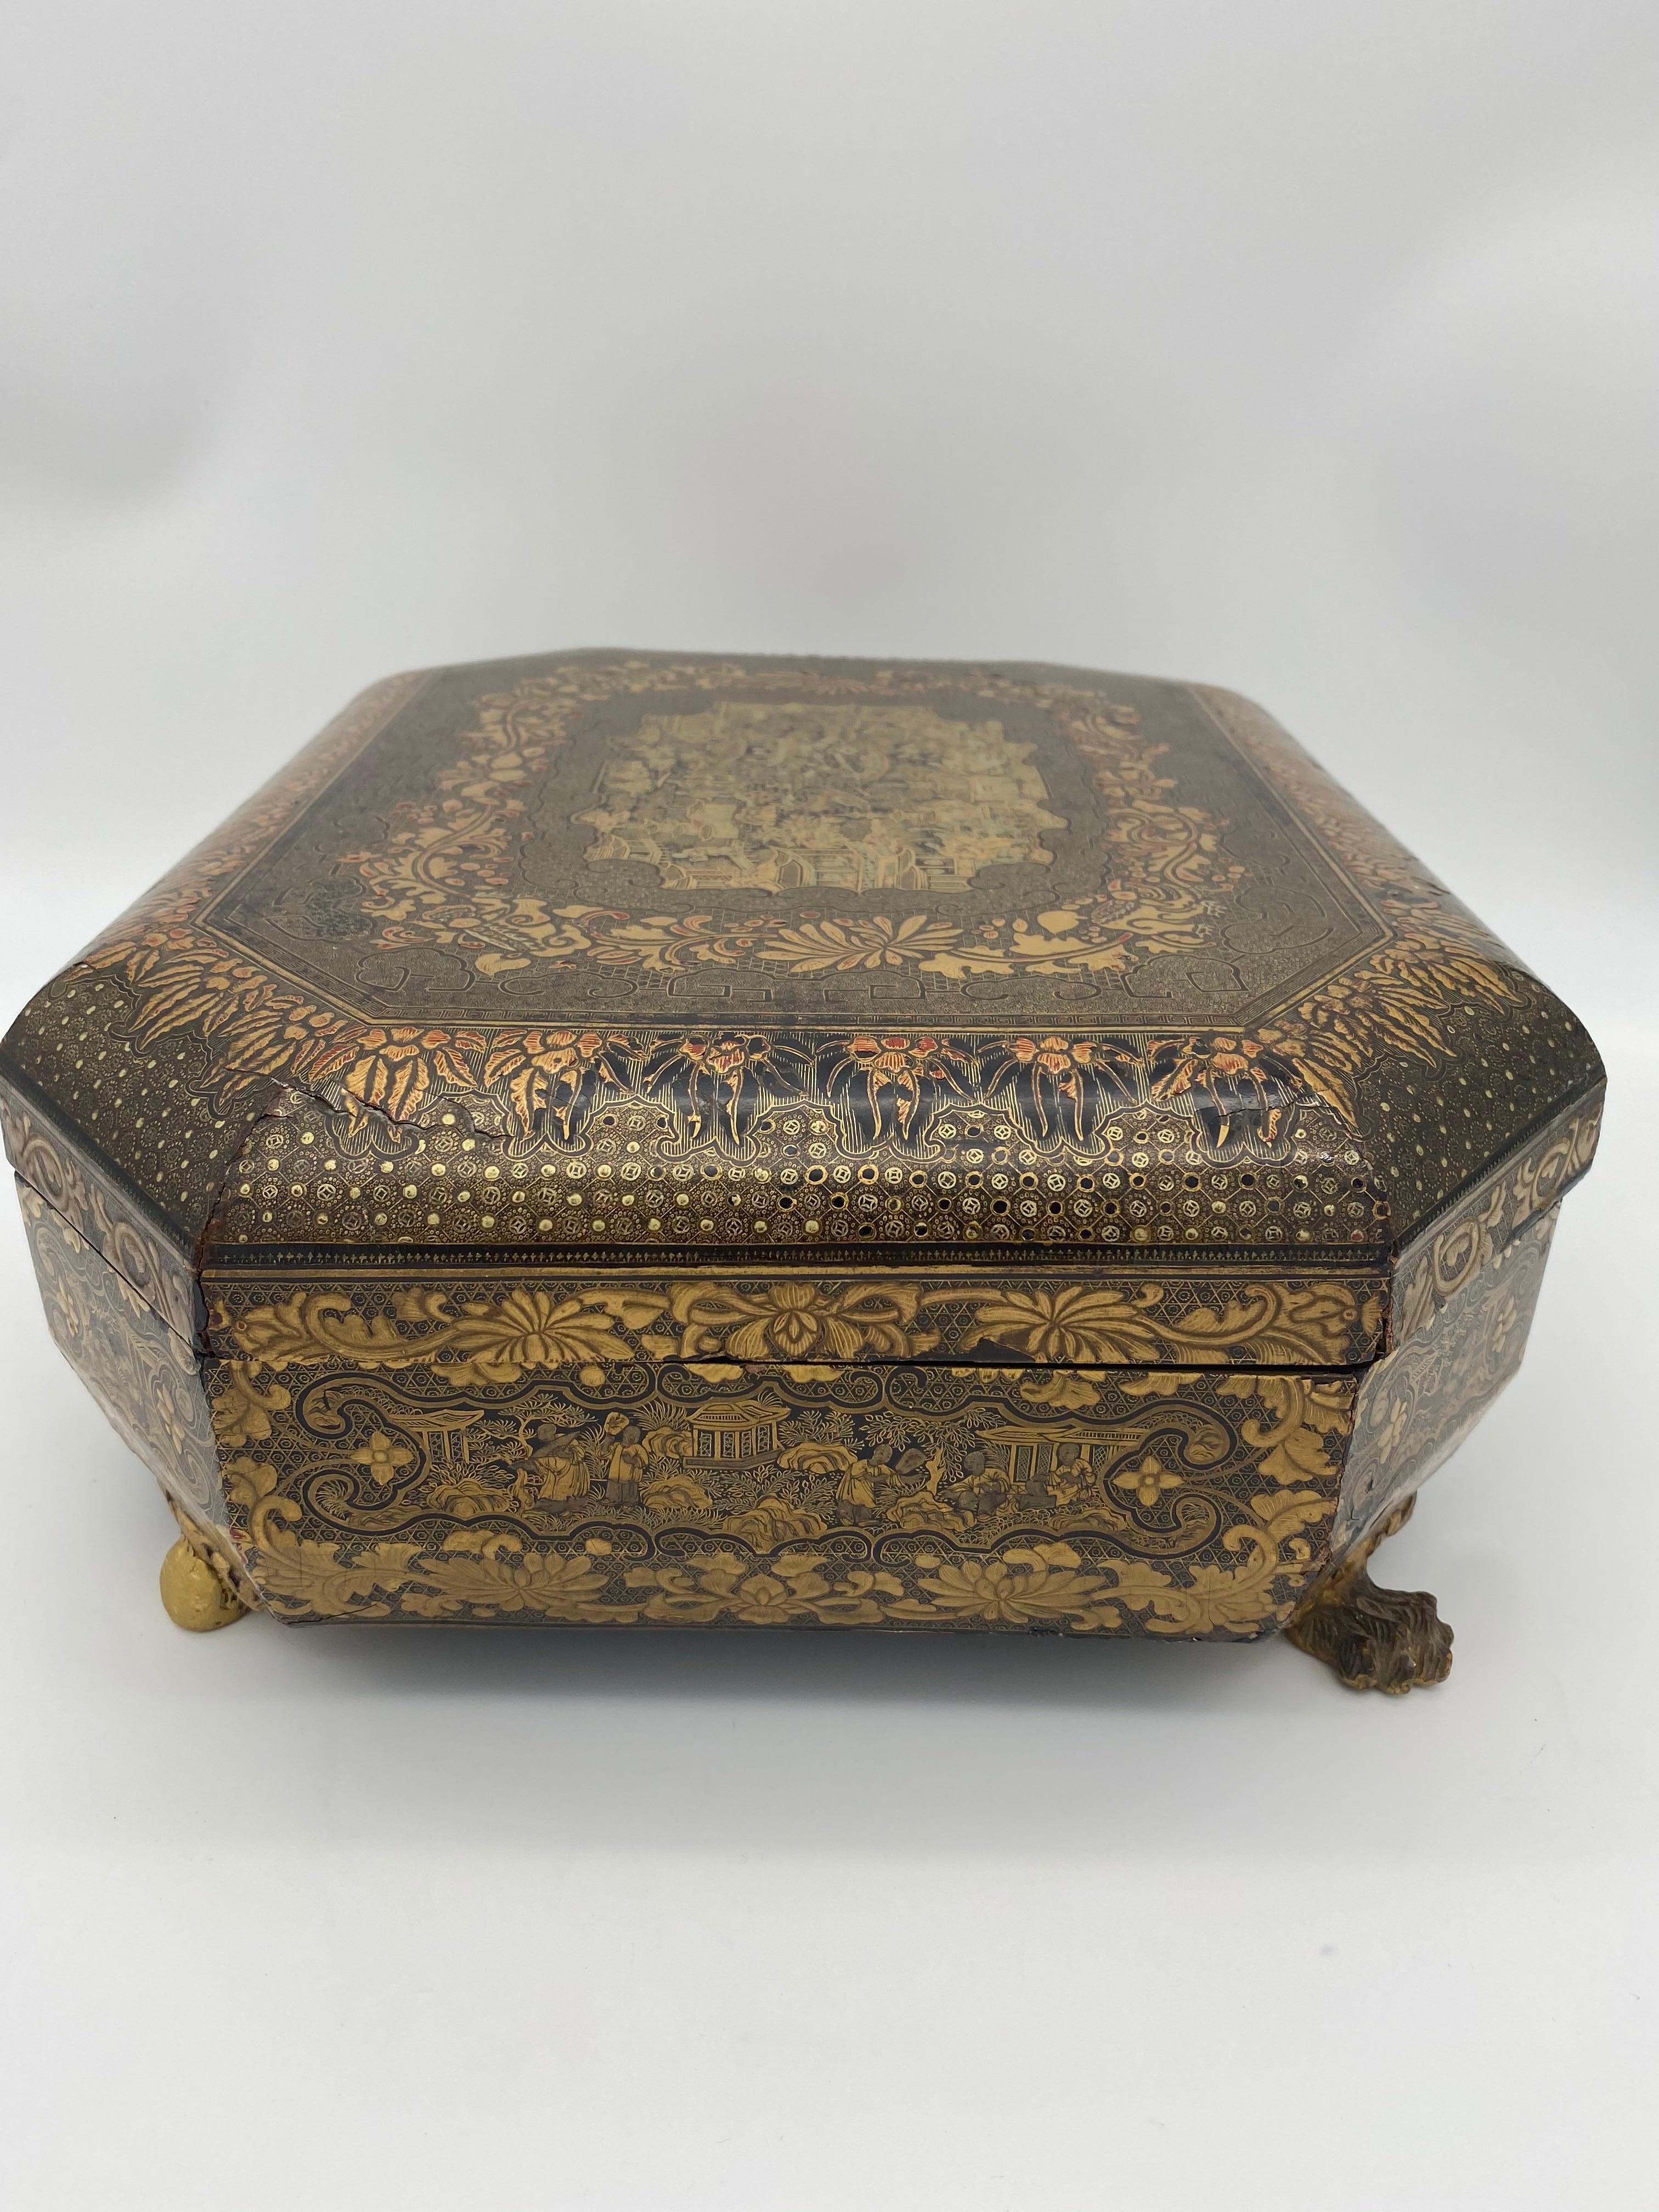 Hand-Painted Antique 19th Century Export Chinese Lacquer Gaming Box For Sale